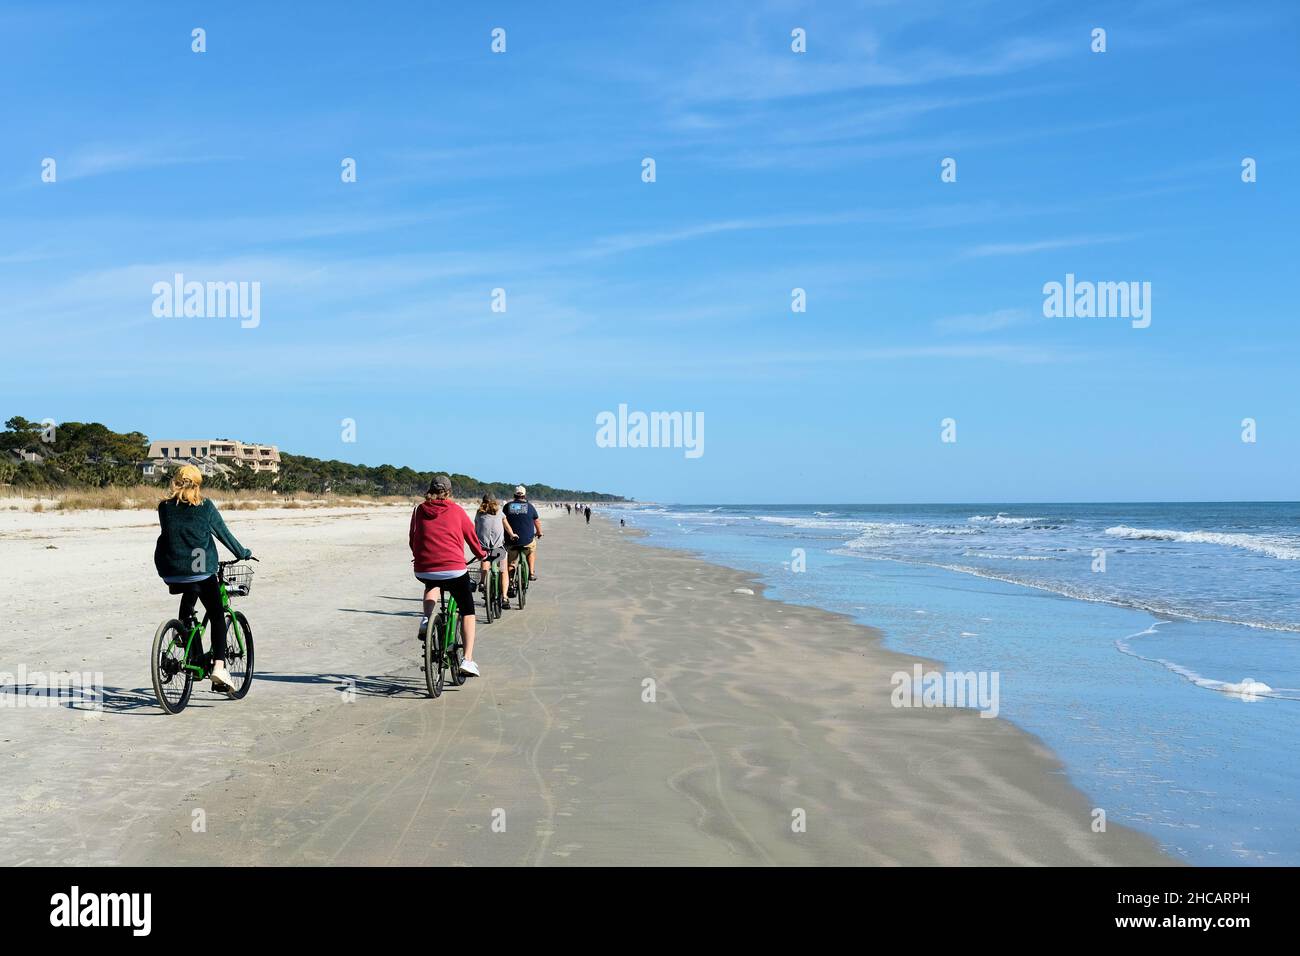 A family of four bicycling on the beach in Hilton Head, South Carolina on winter holiday in December enjoying the mild sunny weather in the lowlands. Stock Photo